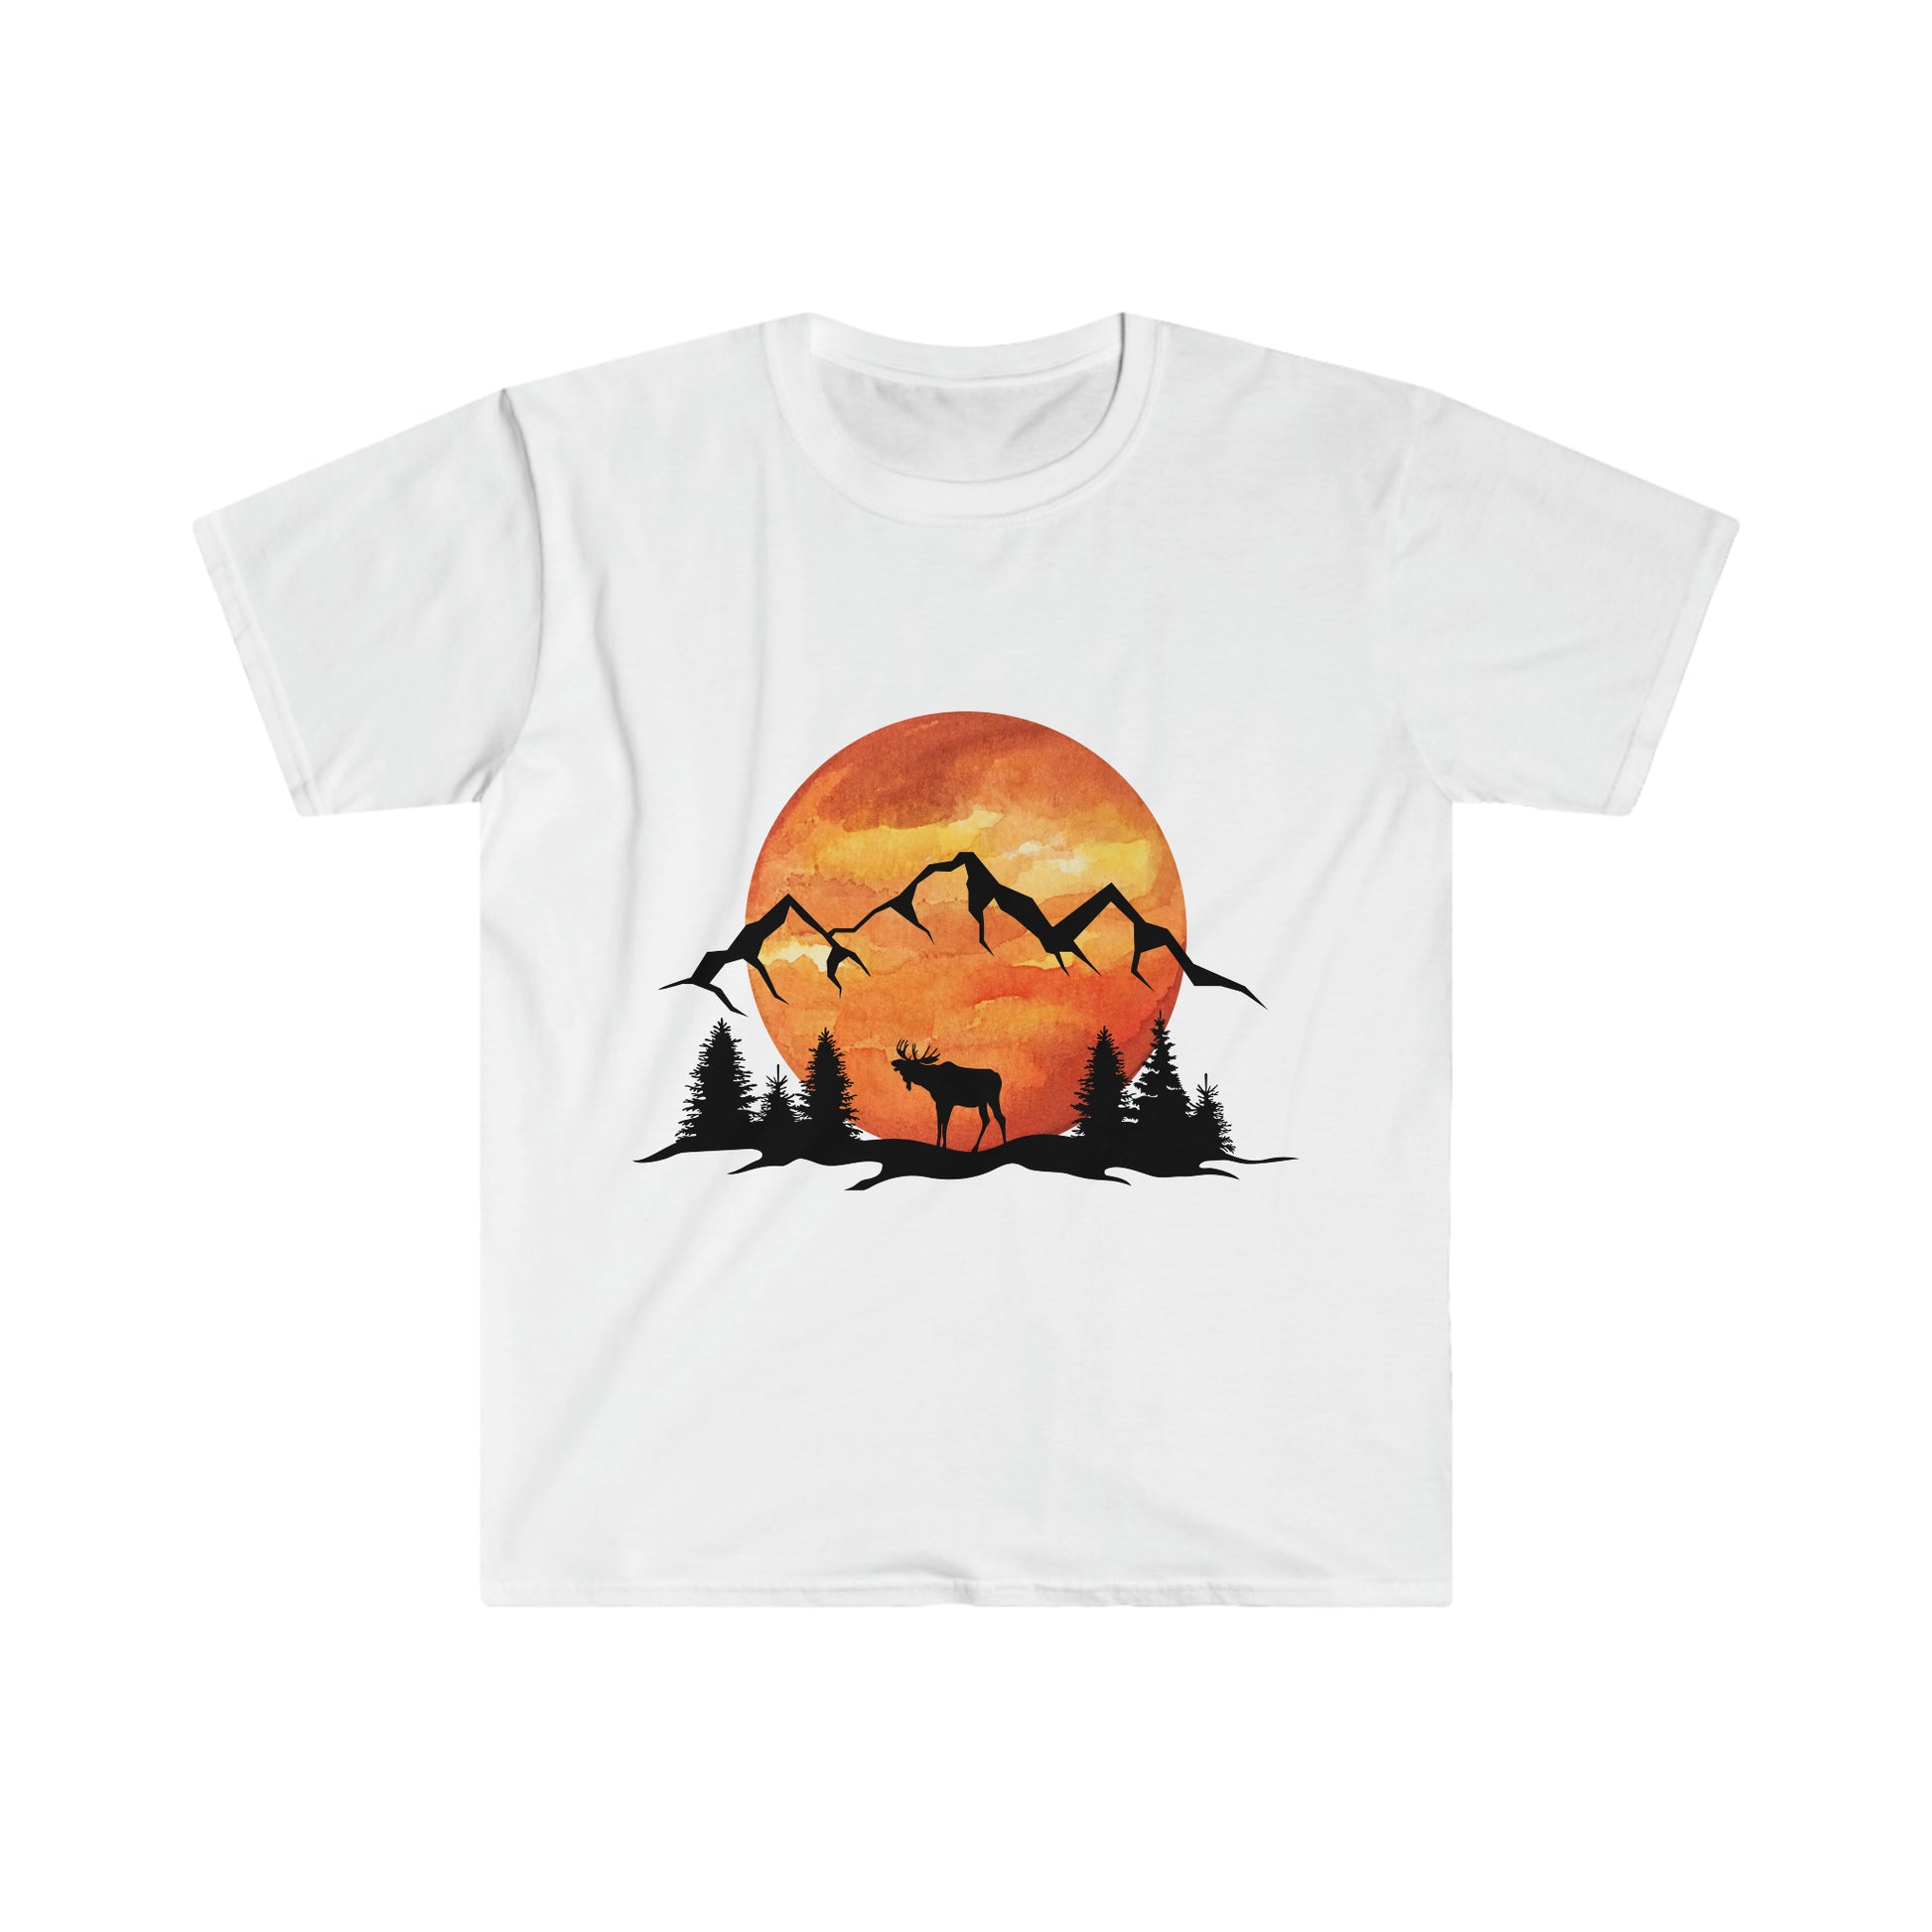 Strawberry Moon Over The Mountains - Urban Camper